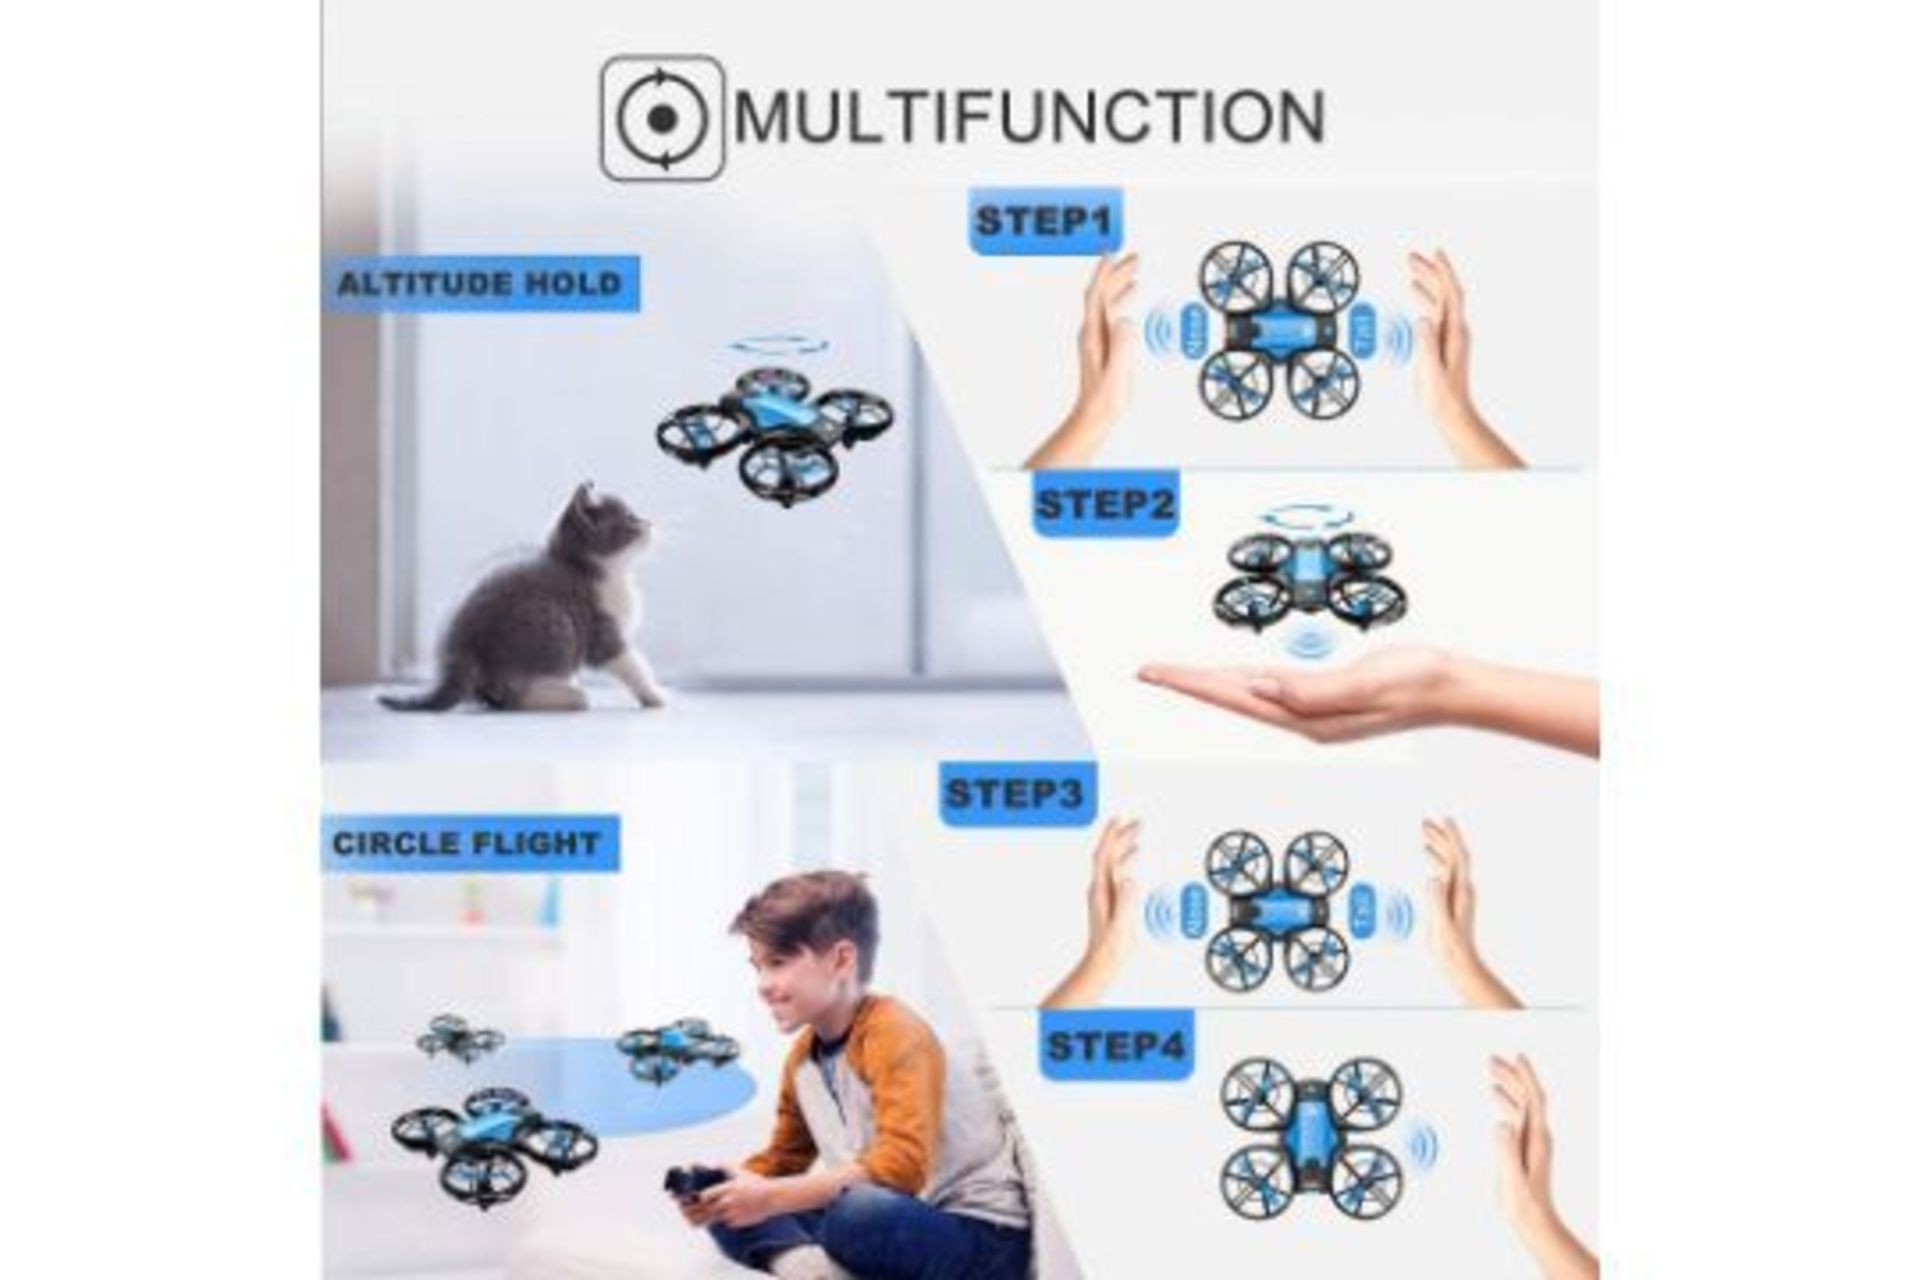 5 X 4DRC Mini Drone for Kids Hand Operated RC Quadcopter Longer Flight Time, (4DV8) Altitude Hold, - Image 3 of 3